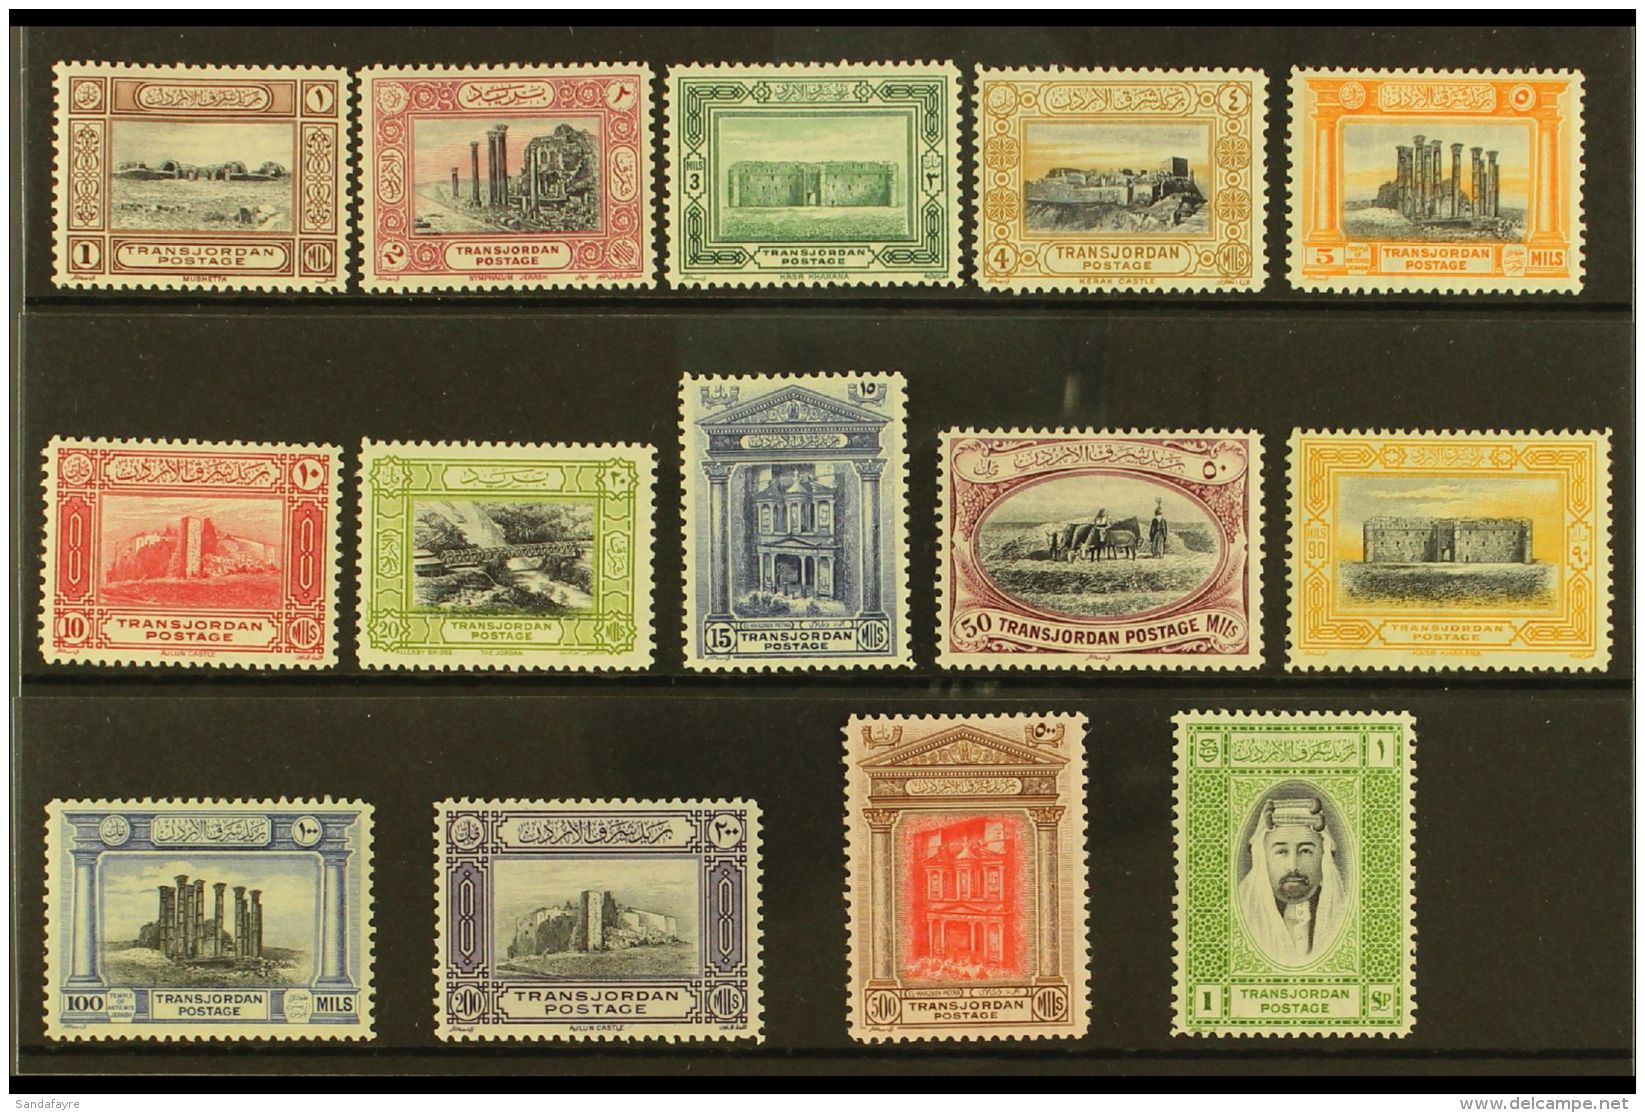 1933 Pictorial Set Complete, SG 208/31, Very Fine Mint Appearance Some Values With Light Gum Toning. (14 Stamps)... - Jordanien